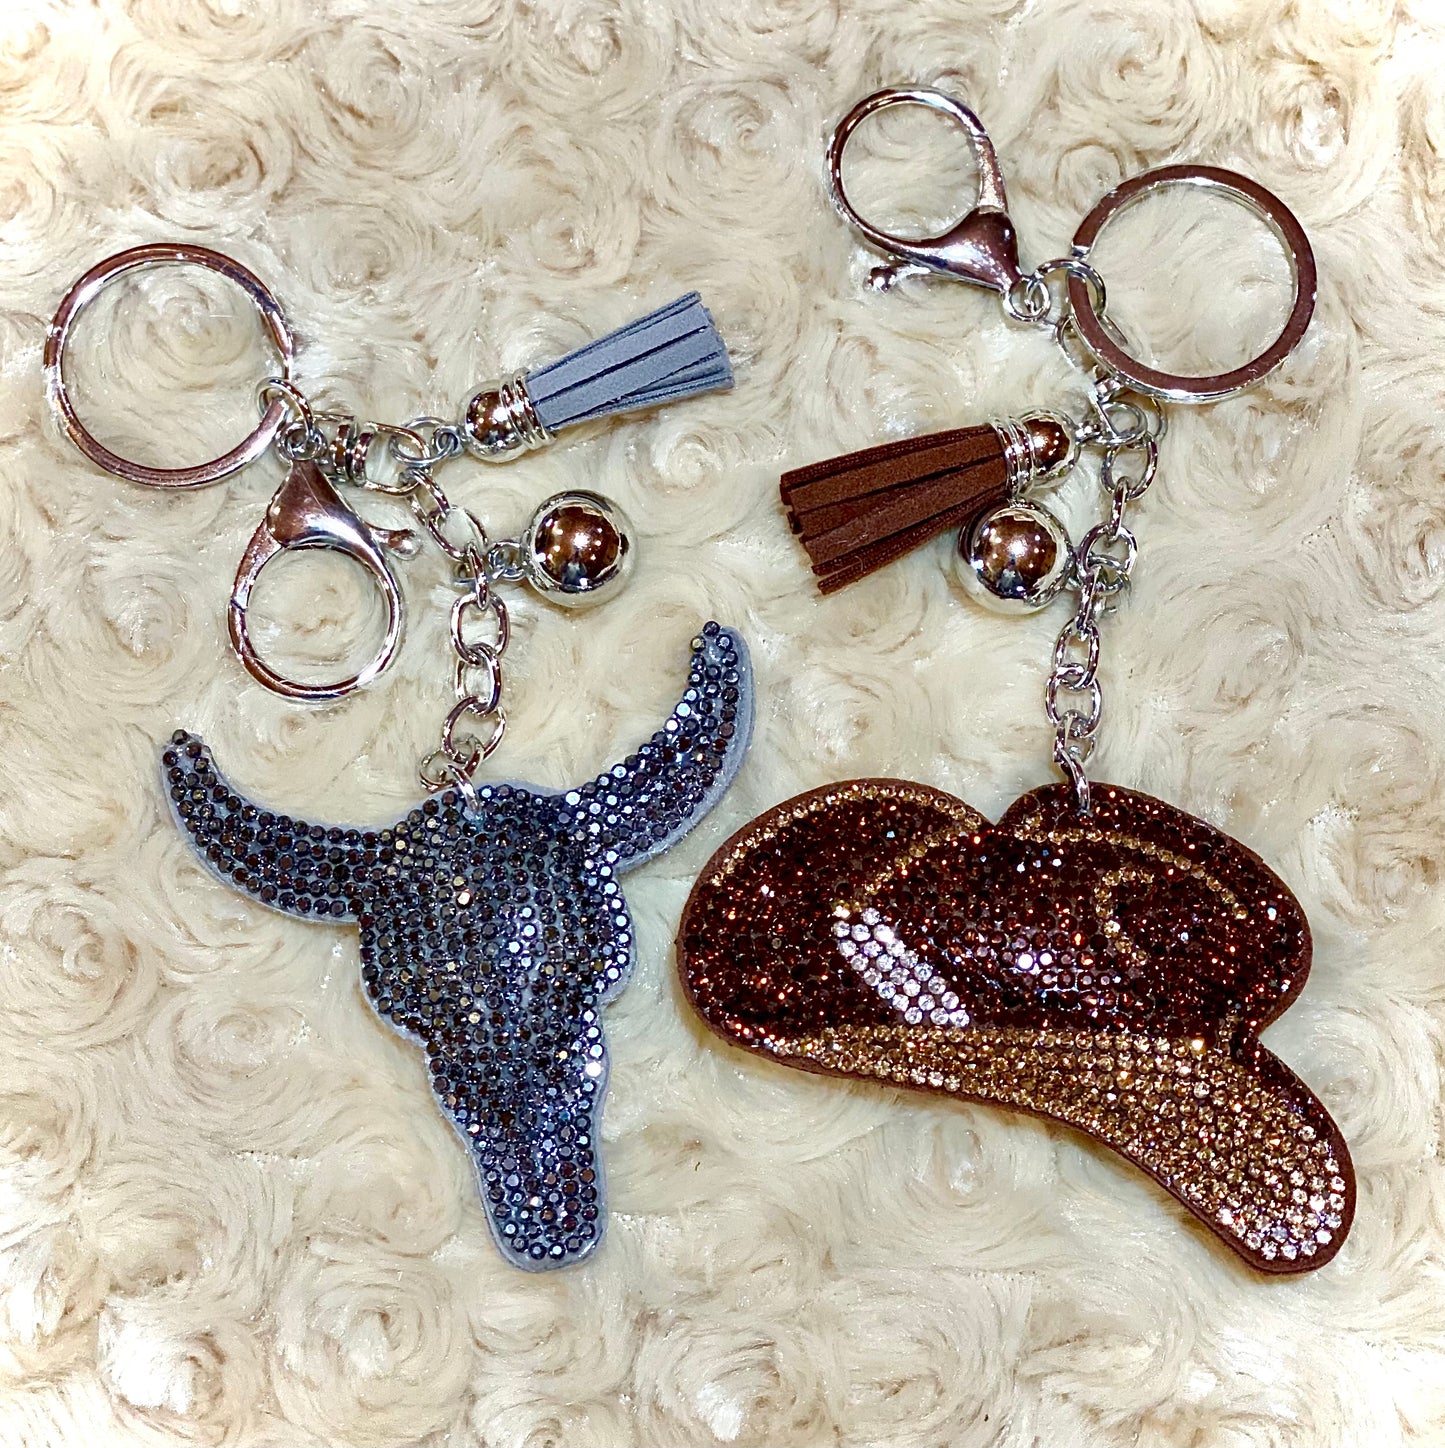 BLINGN’ COWGIRL KEYCHAINS - CountryFide Custom Accessories and Outdoors